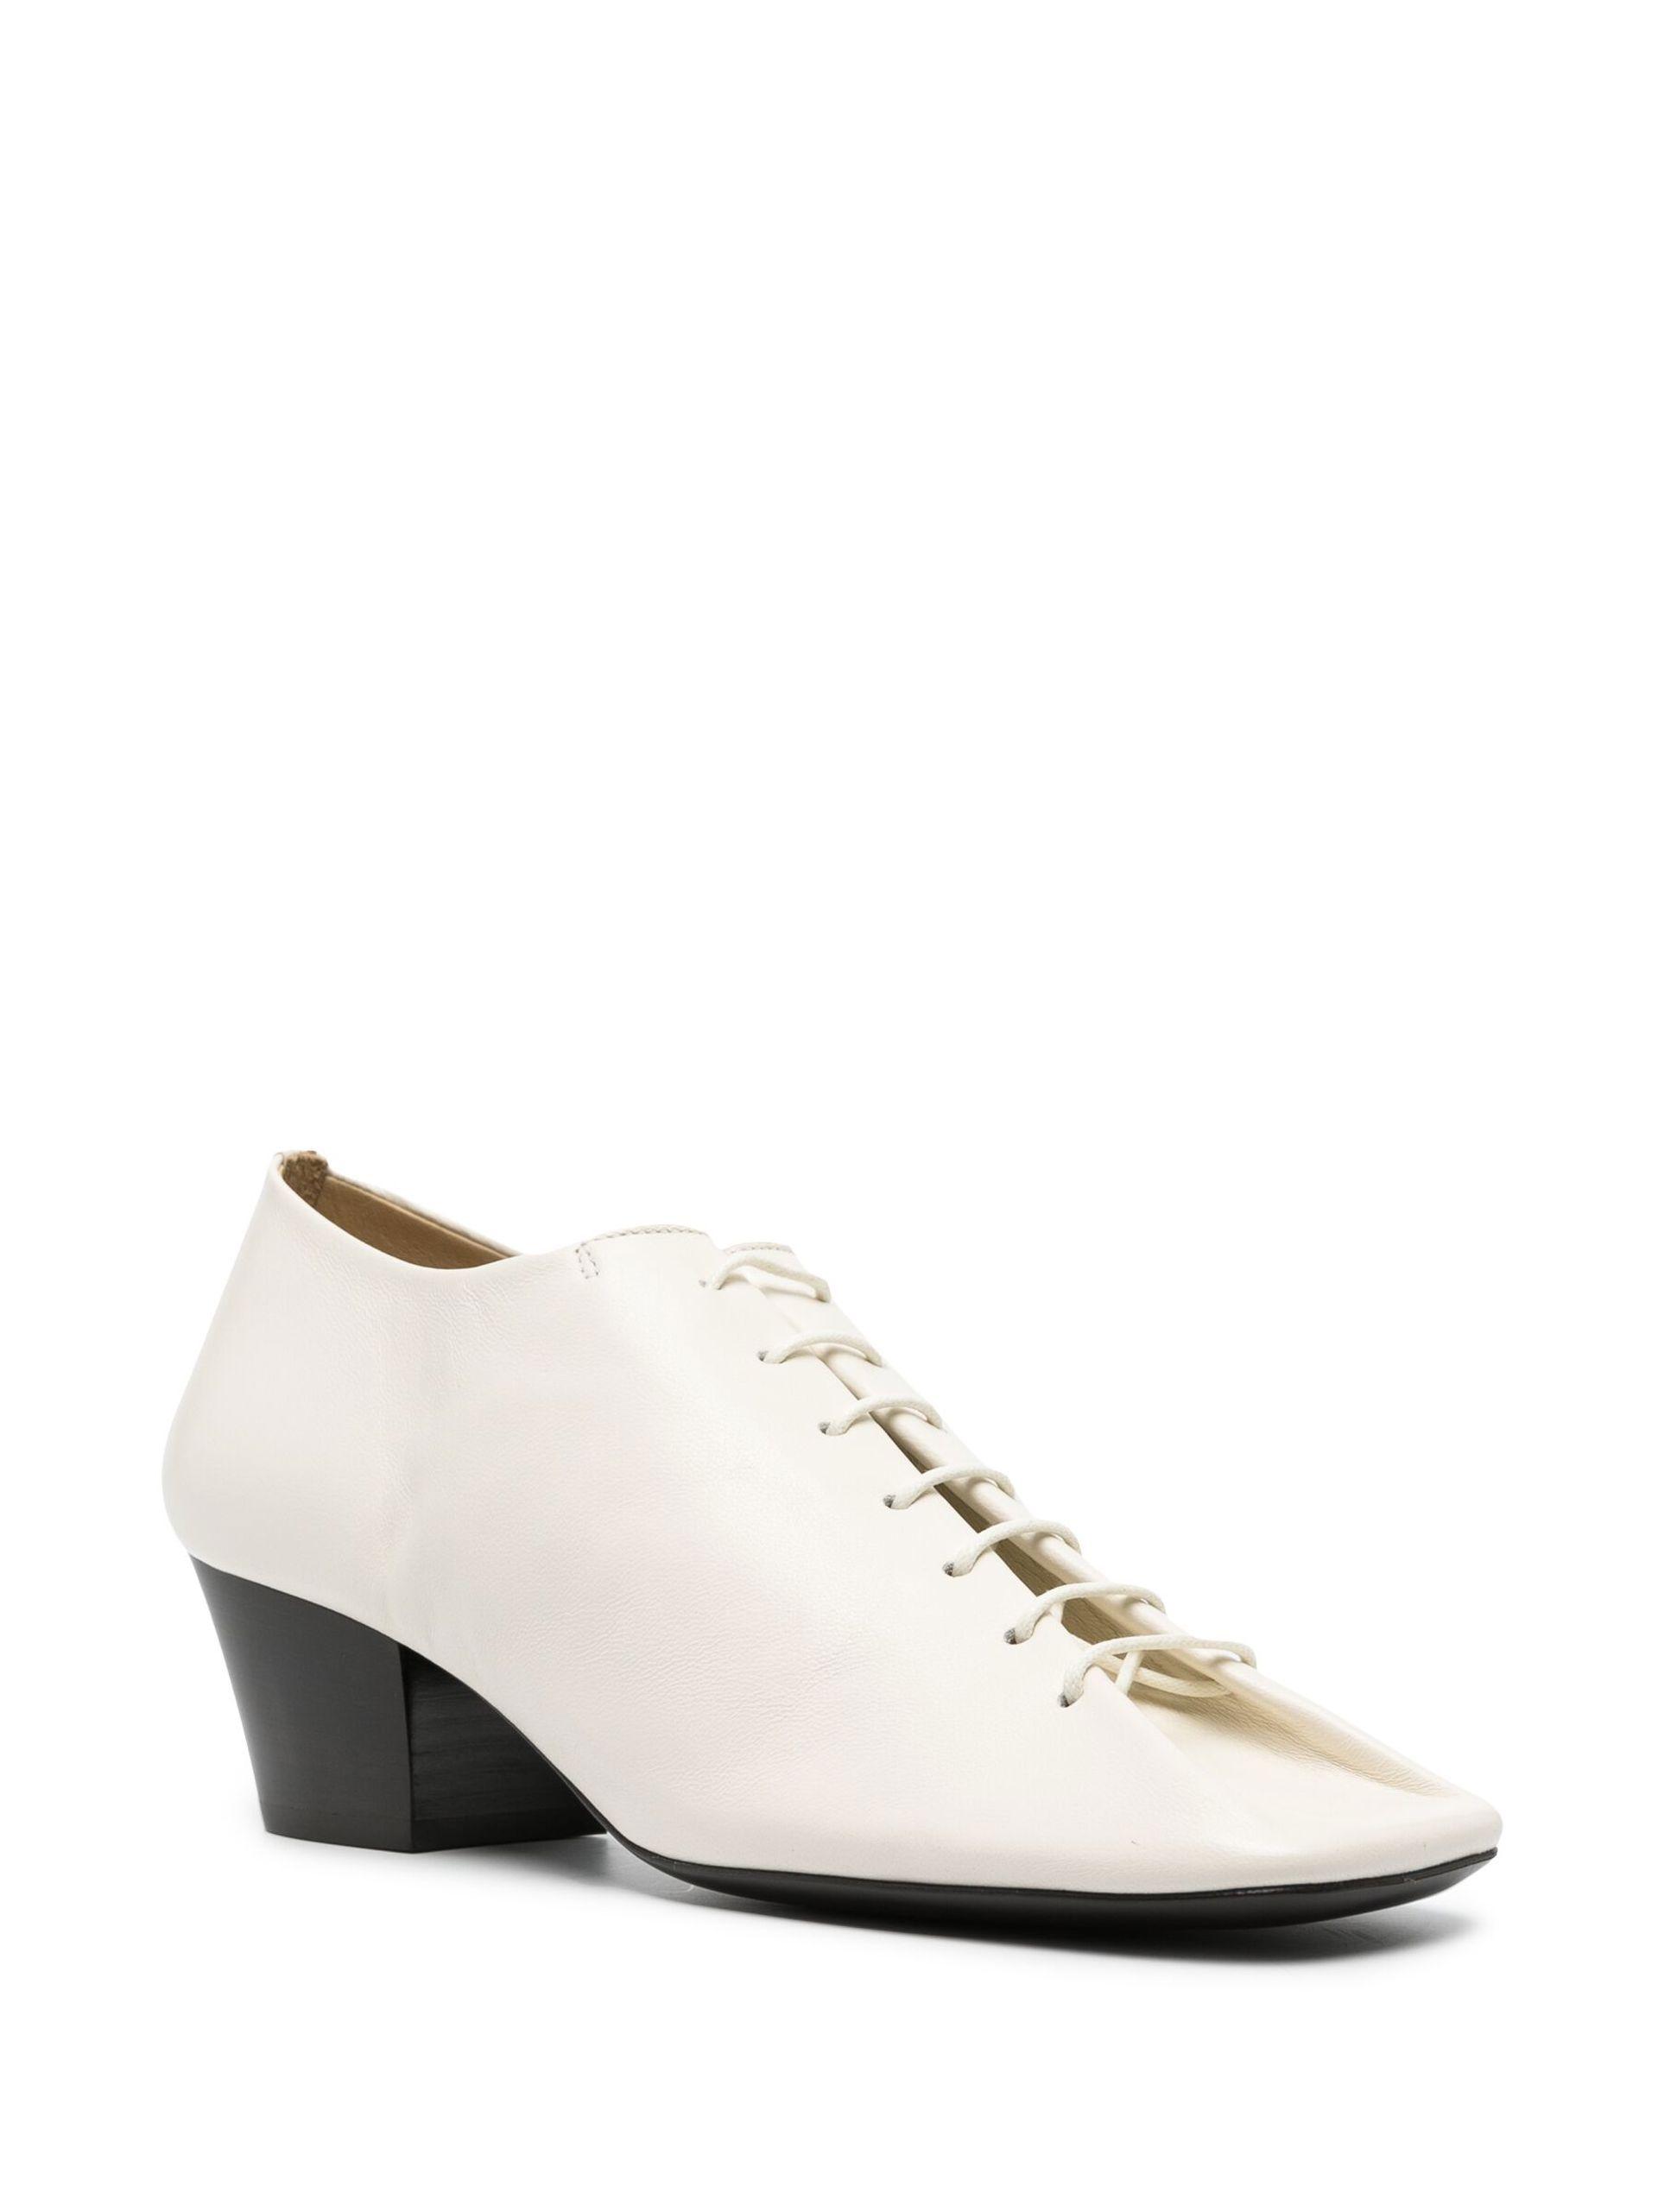 Lemaire White Leather Lace-up Derby Shoes Save 50% Womens Shoes Flats and flat shoes Lace Up shoes and boots 